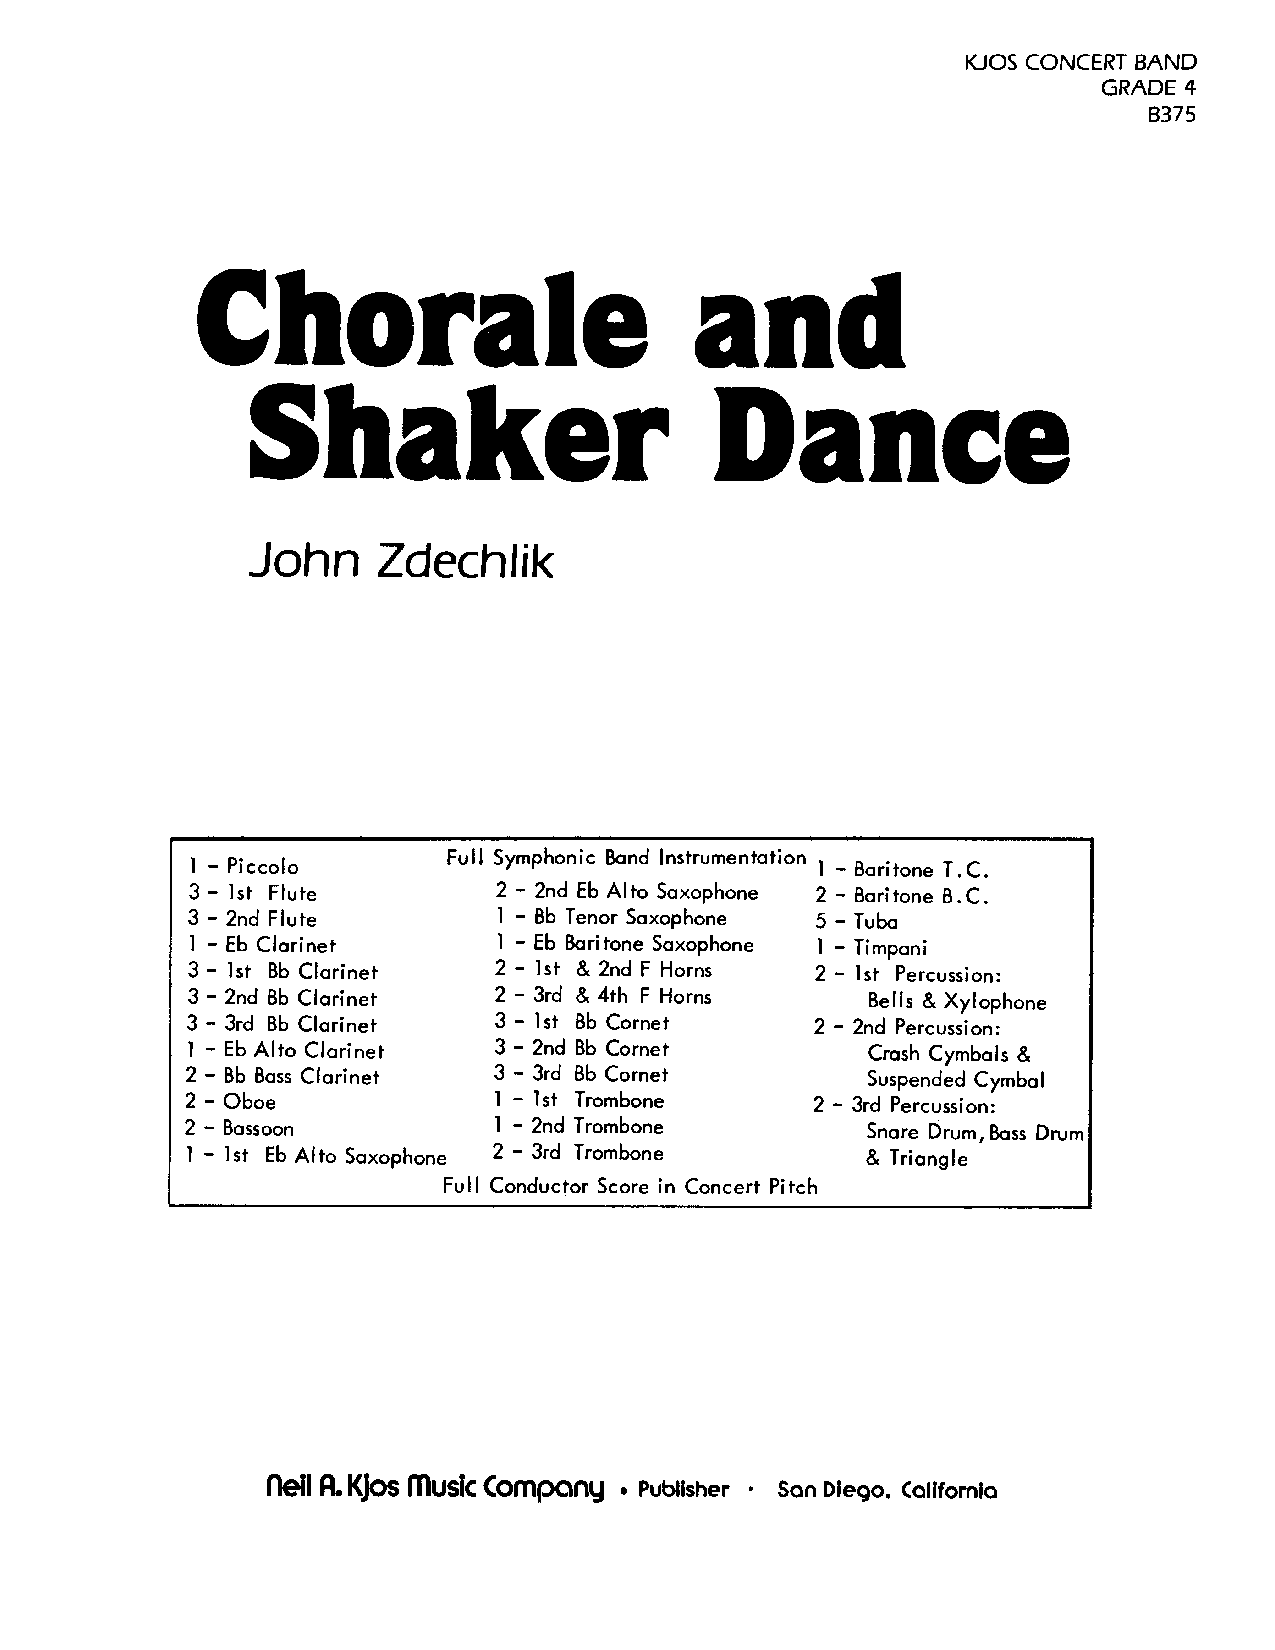 CHORALE AND SHAKER DANCE